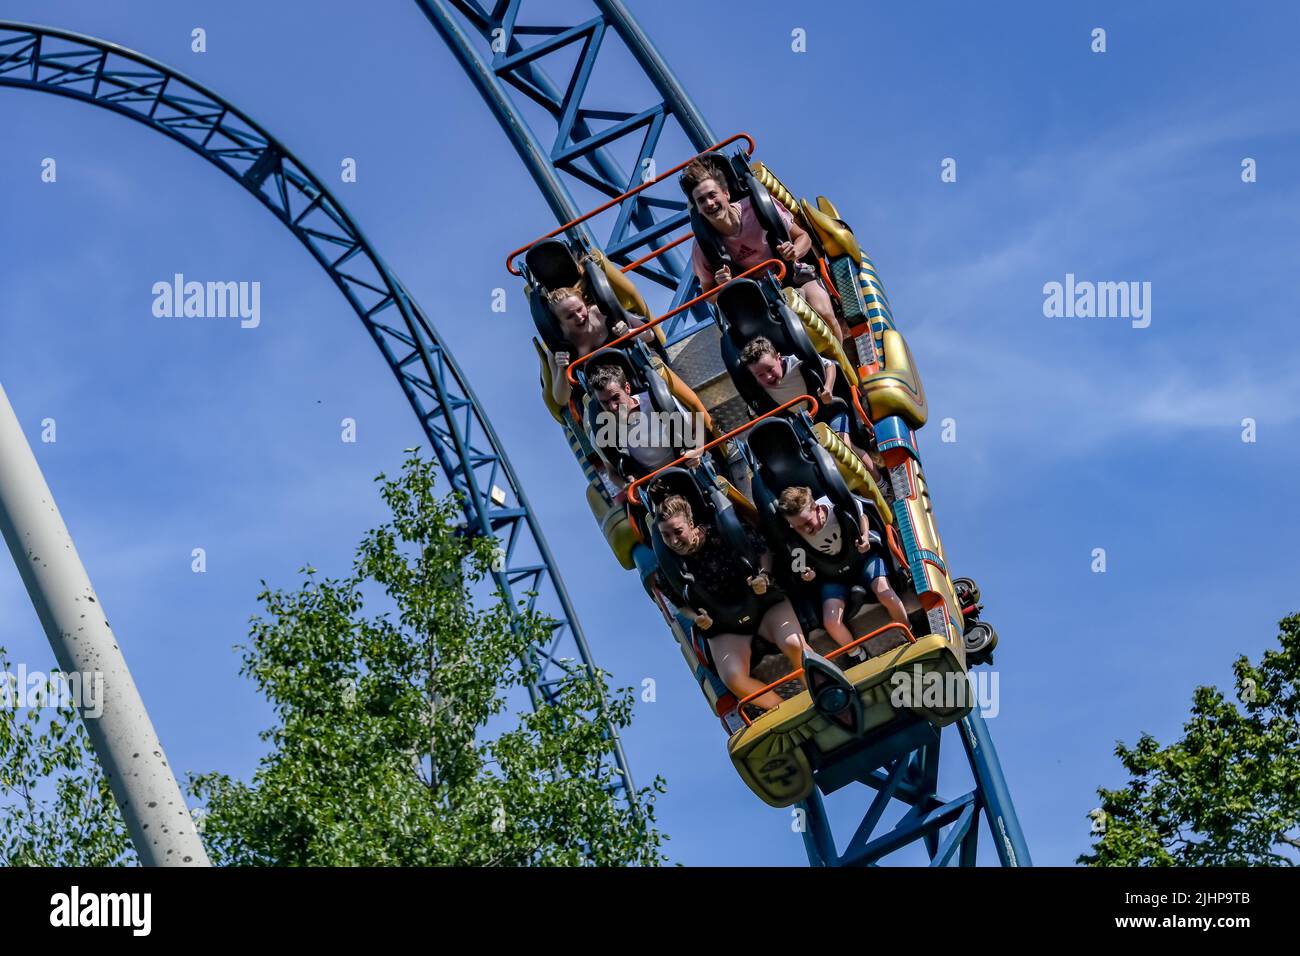 People ride 'Anubis The Ride', a steel roller coaster located at Plopsaland in Belgium Stock Photo